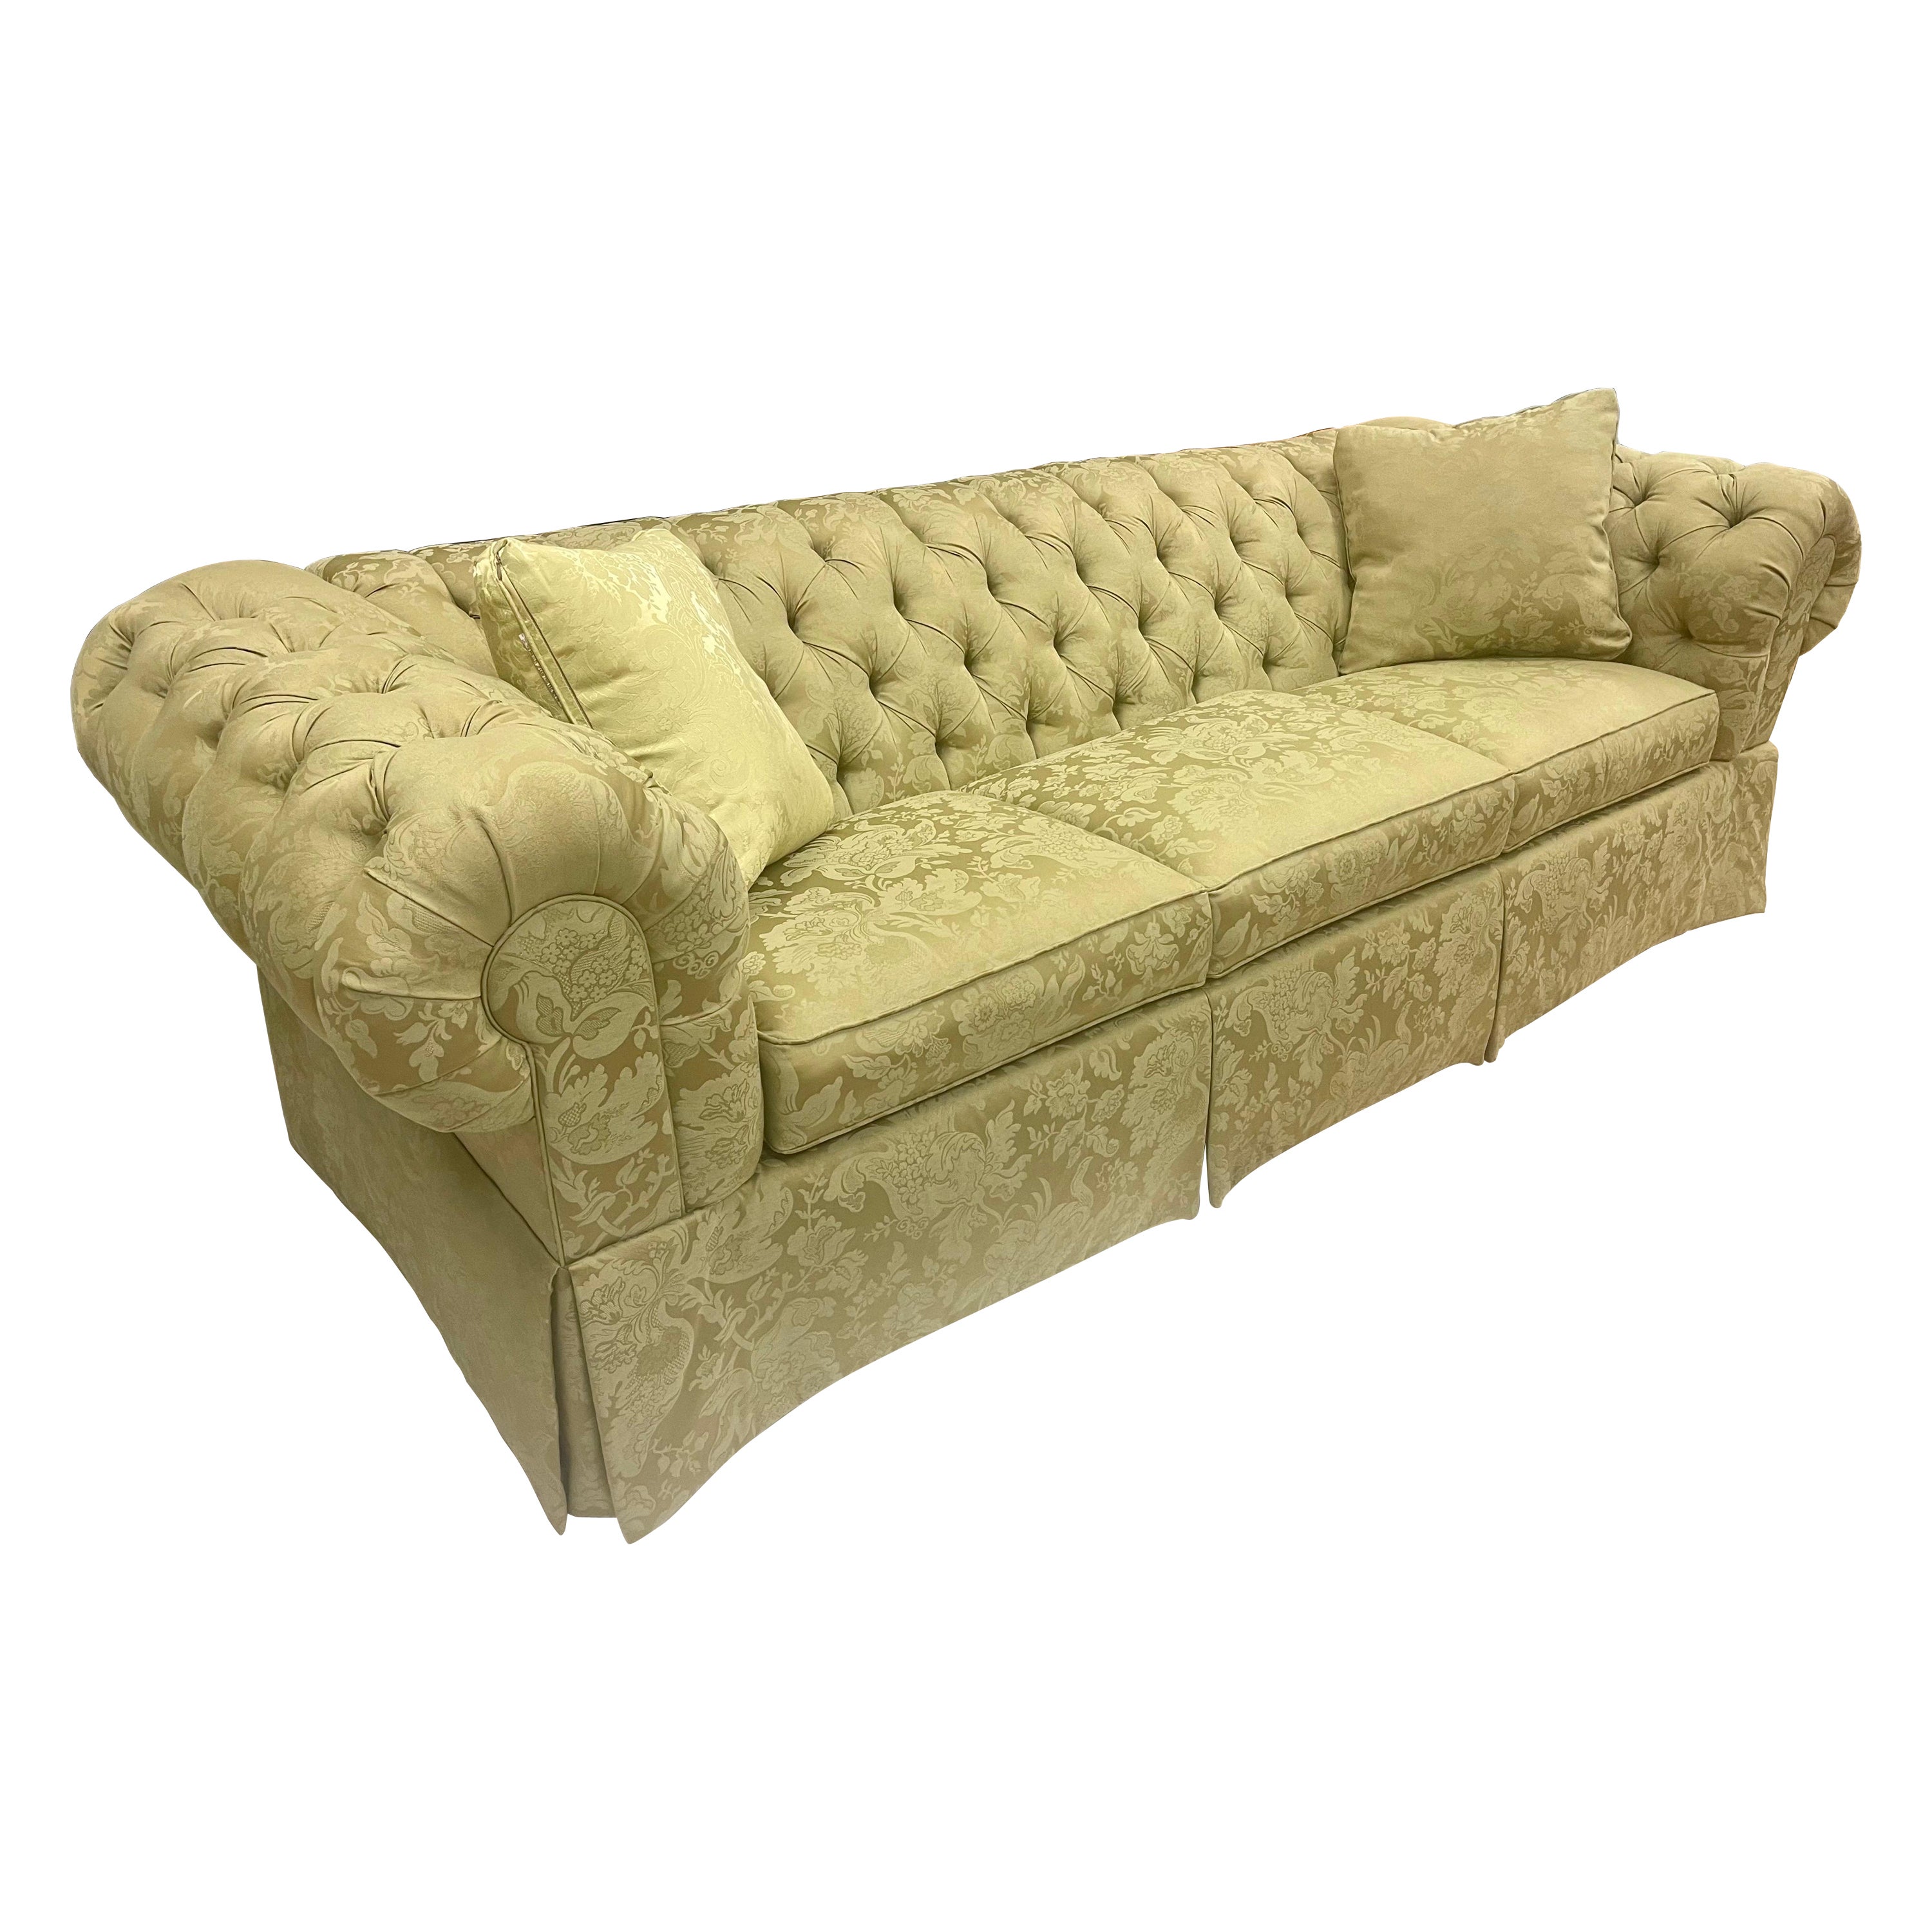 Chesterfield Tufted Three Seater Sofa in Rare Olive Paisley Upholstery